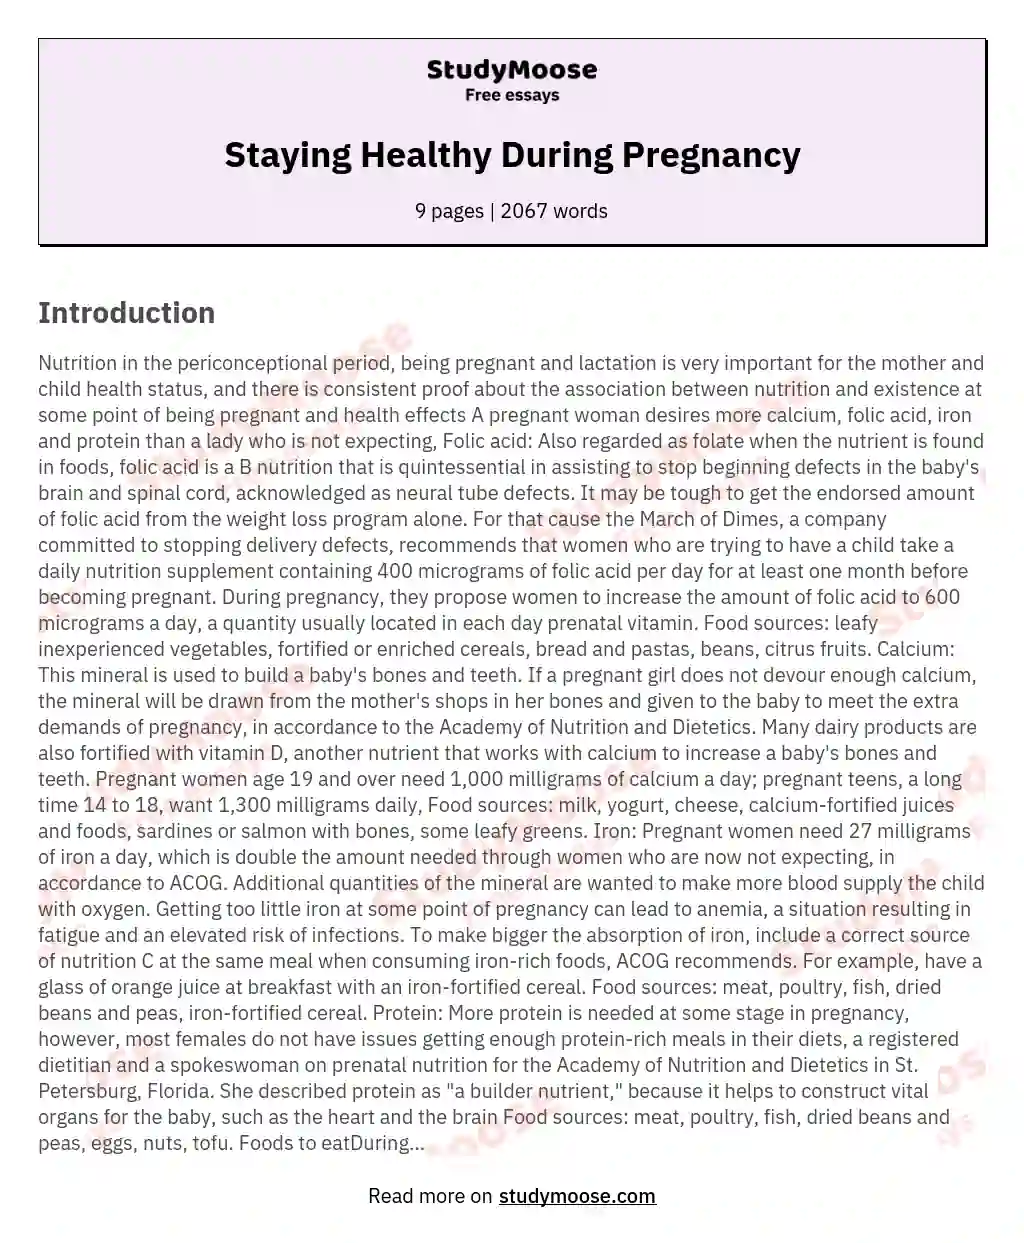 Staying Healthy During Pregnancy essay